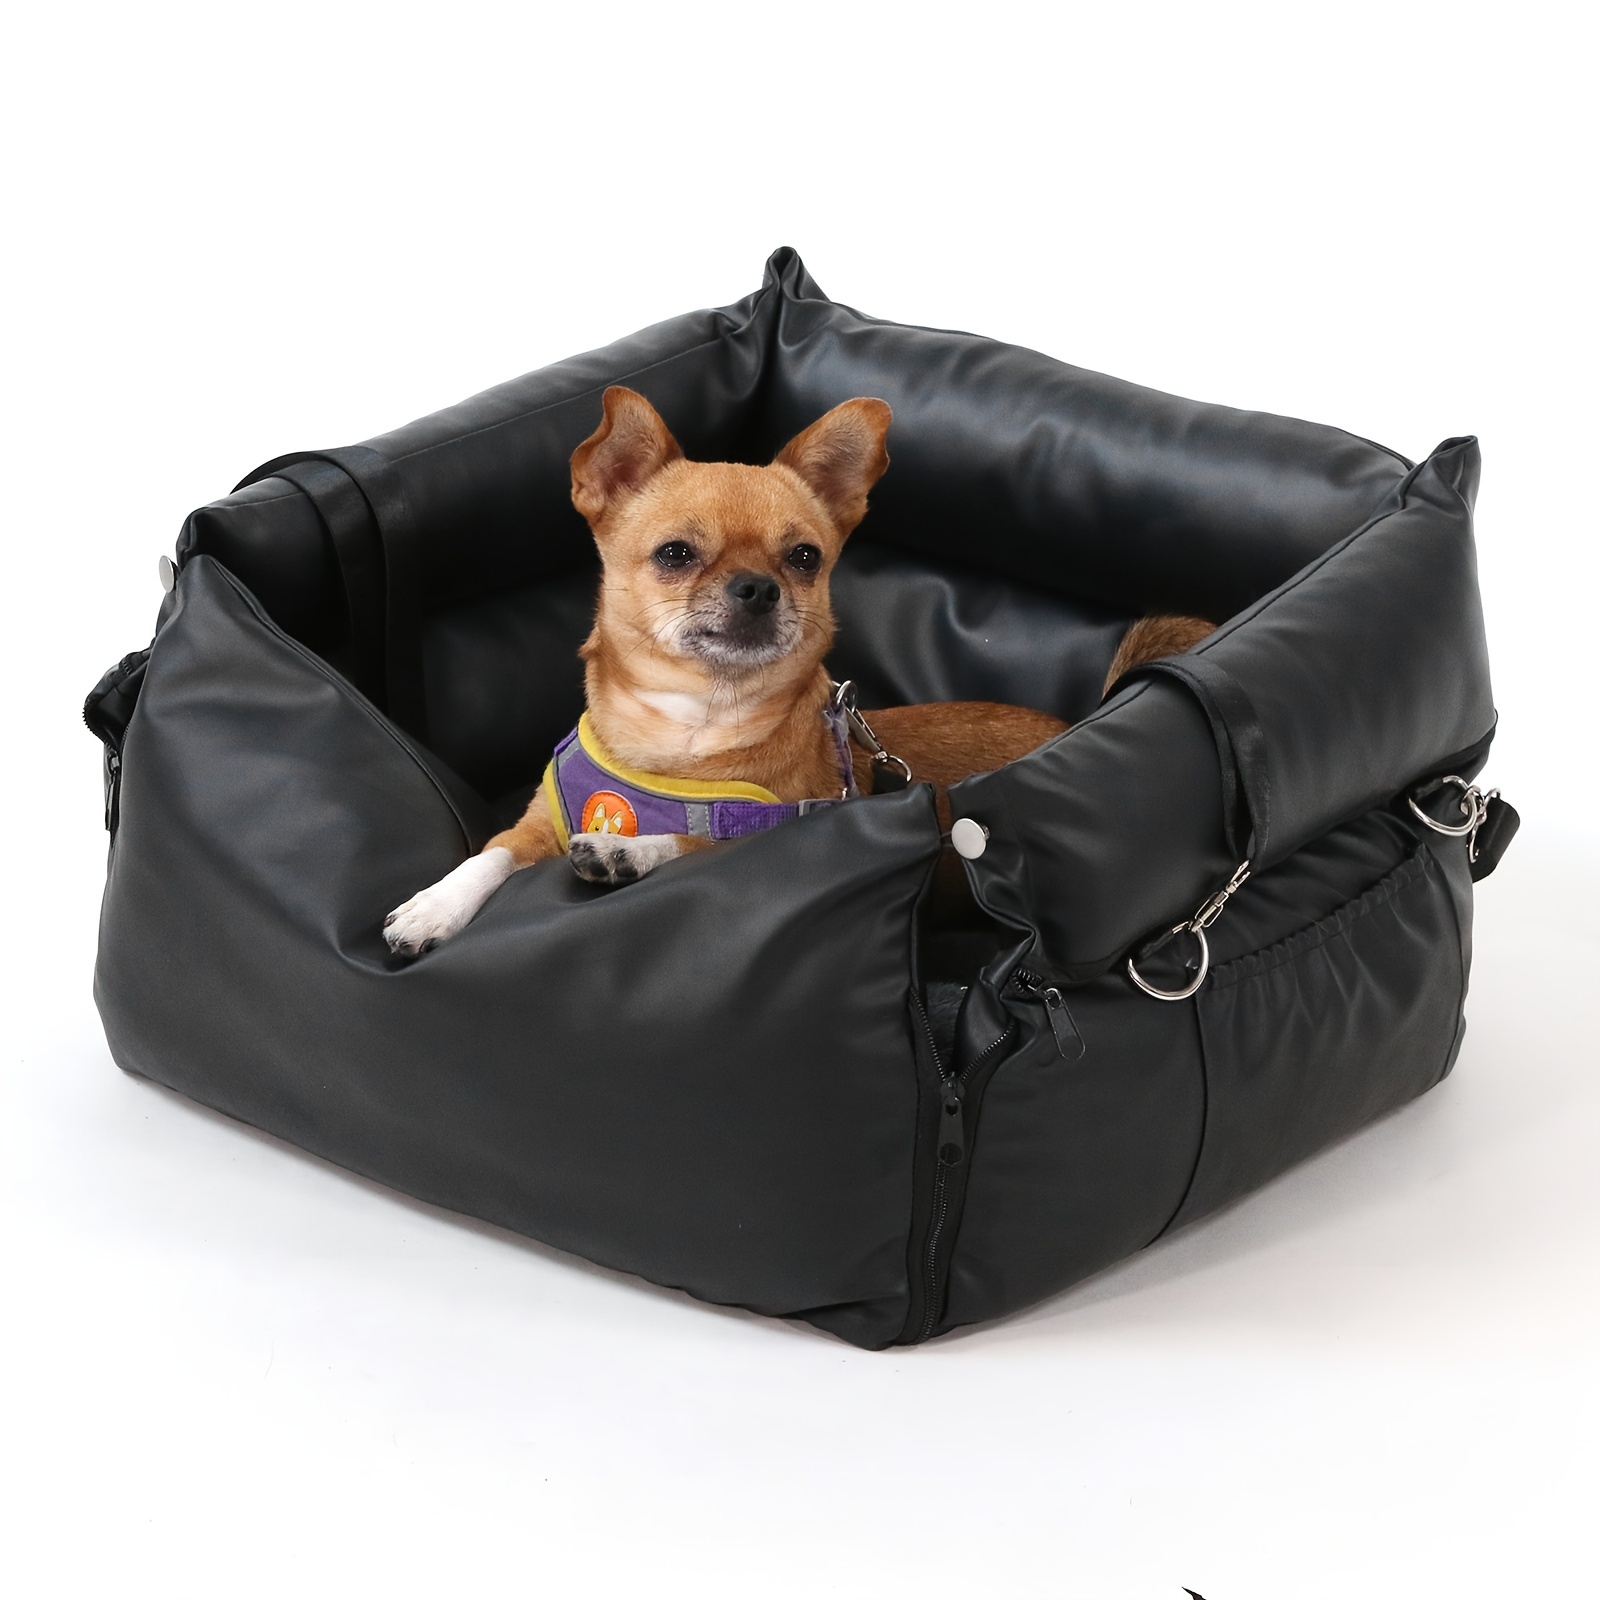 

Dog Car Seat, Dog Booster Seat For Small Dogs, Pu Leather Made, Waterproof & Easy To Clean, Suitable For Front And Back Seats, With 2-storage Pockets And Clip-on Leash Portable